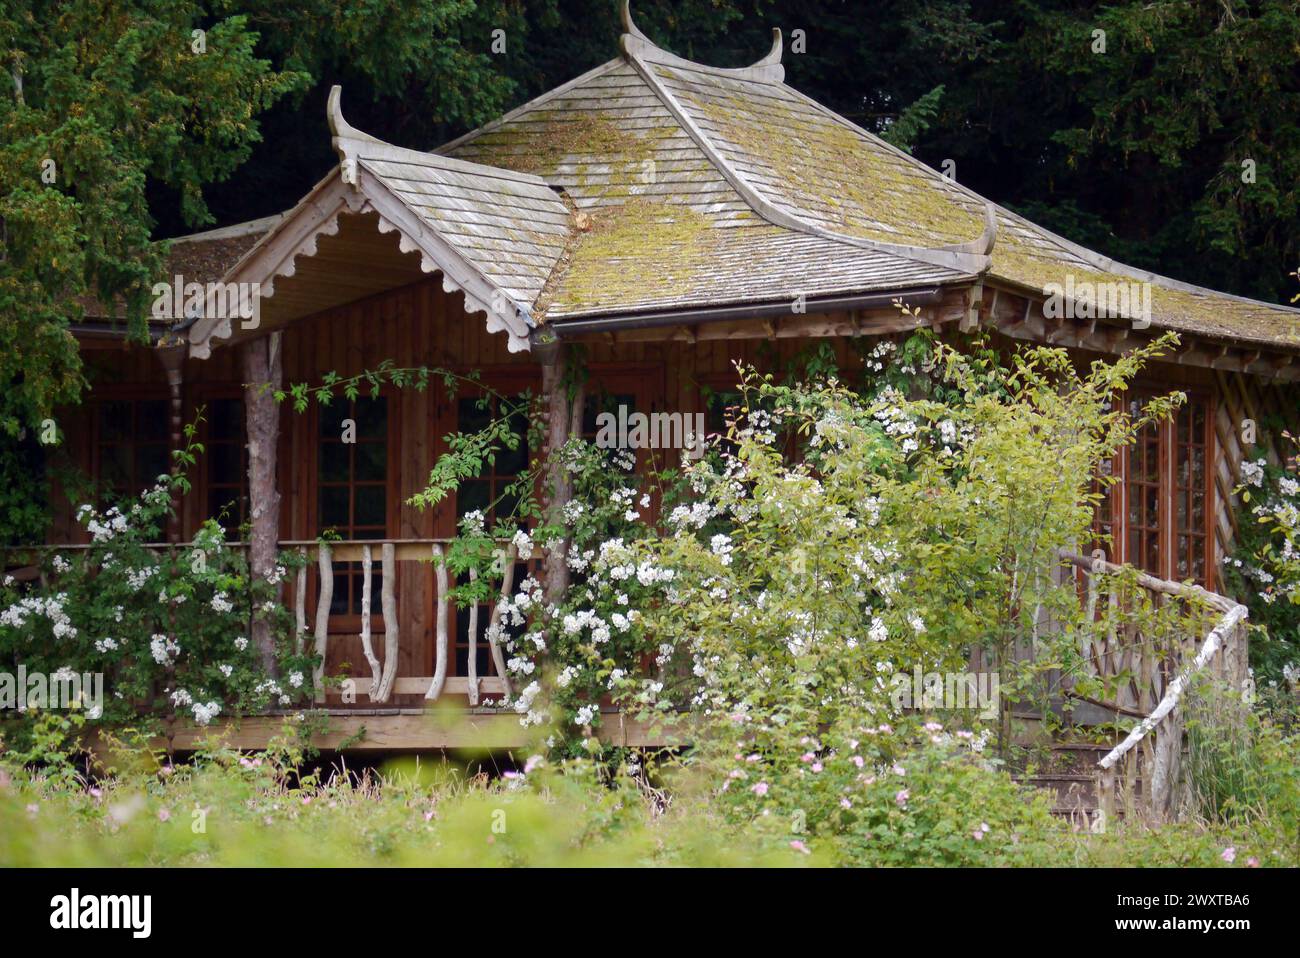 Wooden Silent Space-Jack Croft's Summerhouse at Lowther Castle, Lake District National Park, Cumbria, Angleterre, Royaume-Uni. Banque D'Images